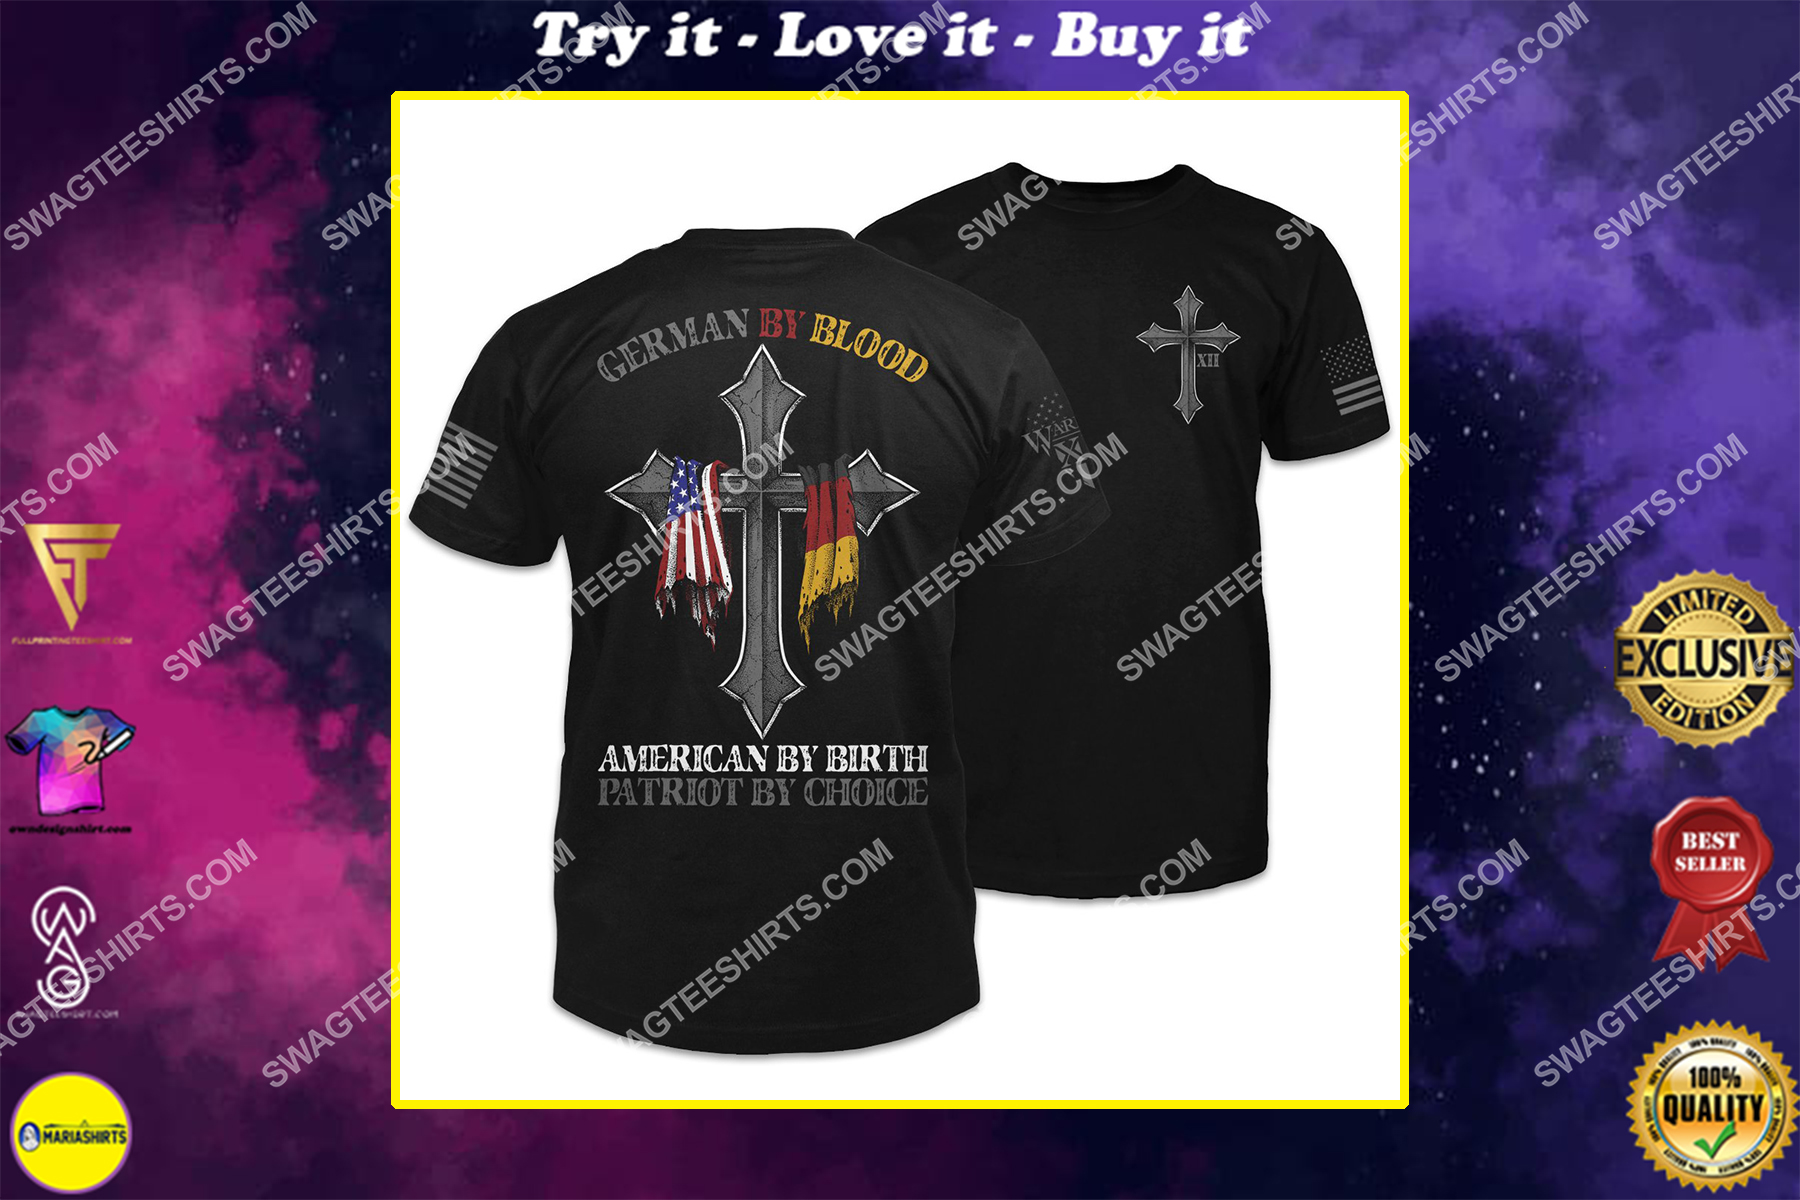 german by blood american by birth patriot by choice shirt